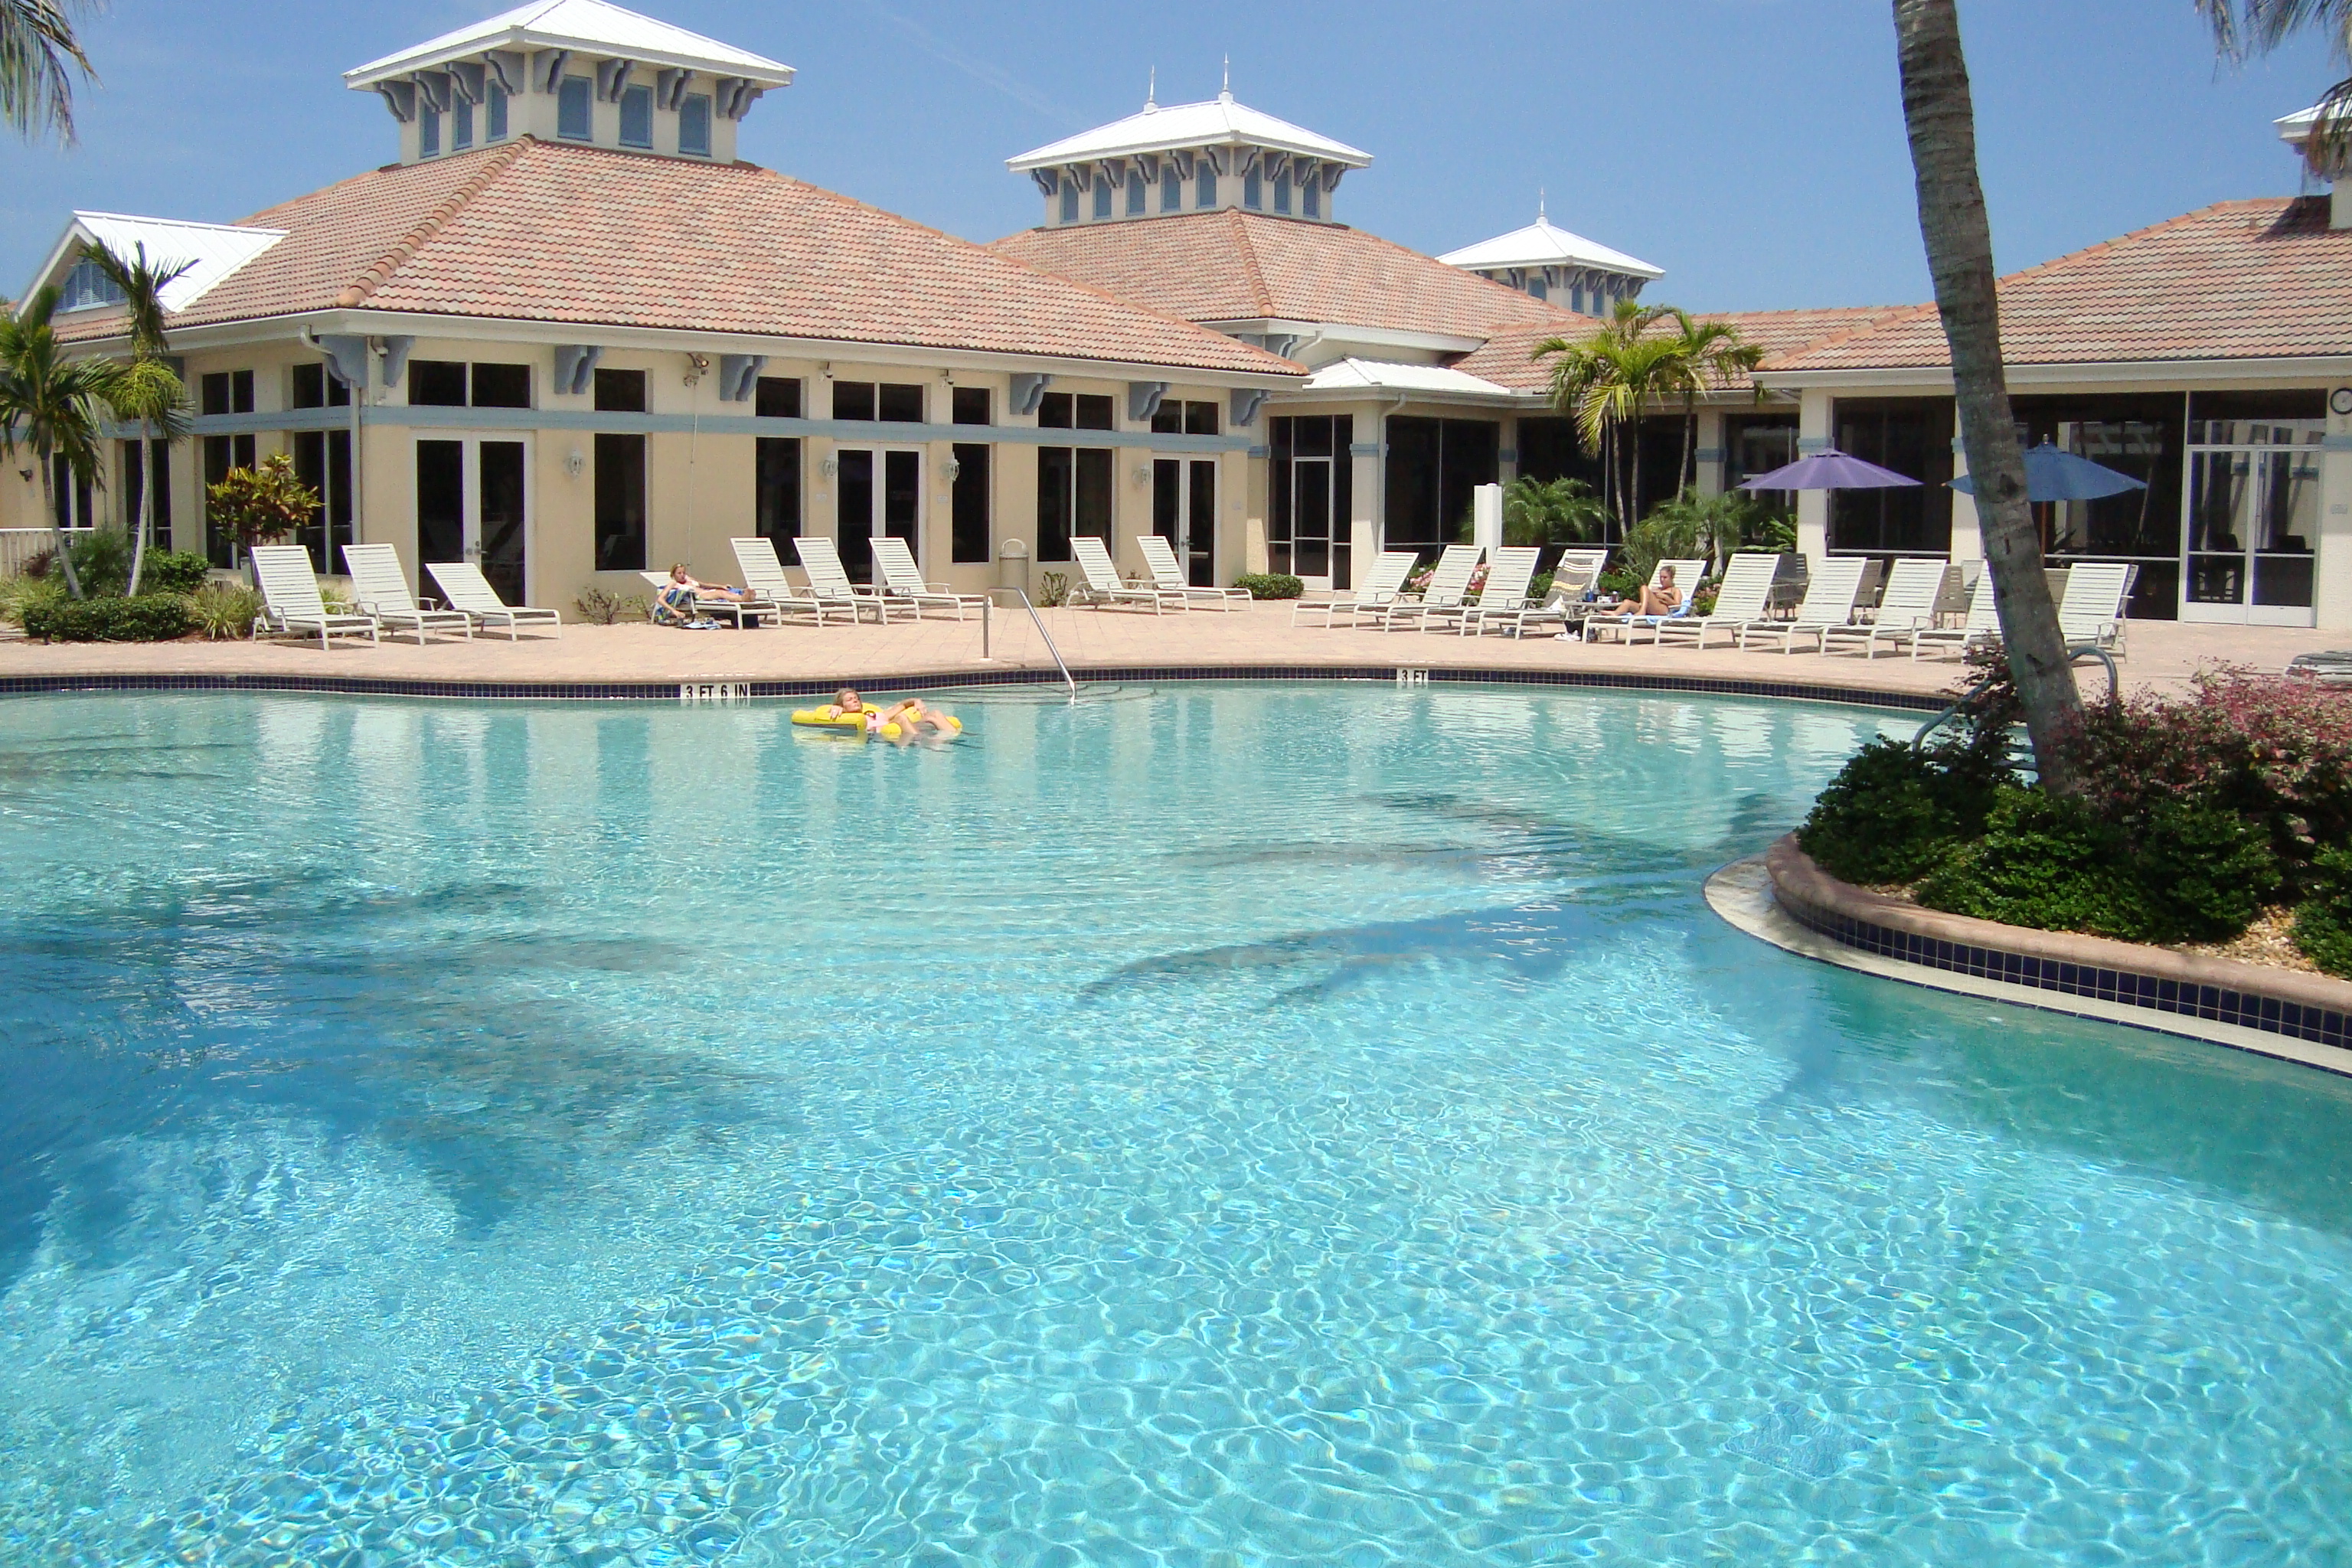 Pool and clubhouse at Bridgewater Bay in Naples, Florida.